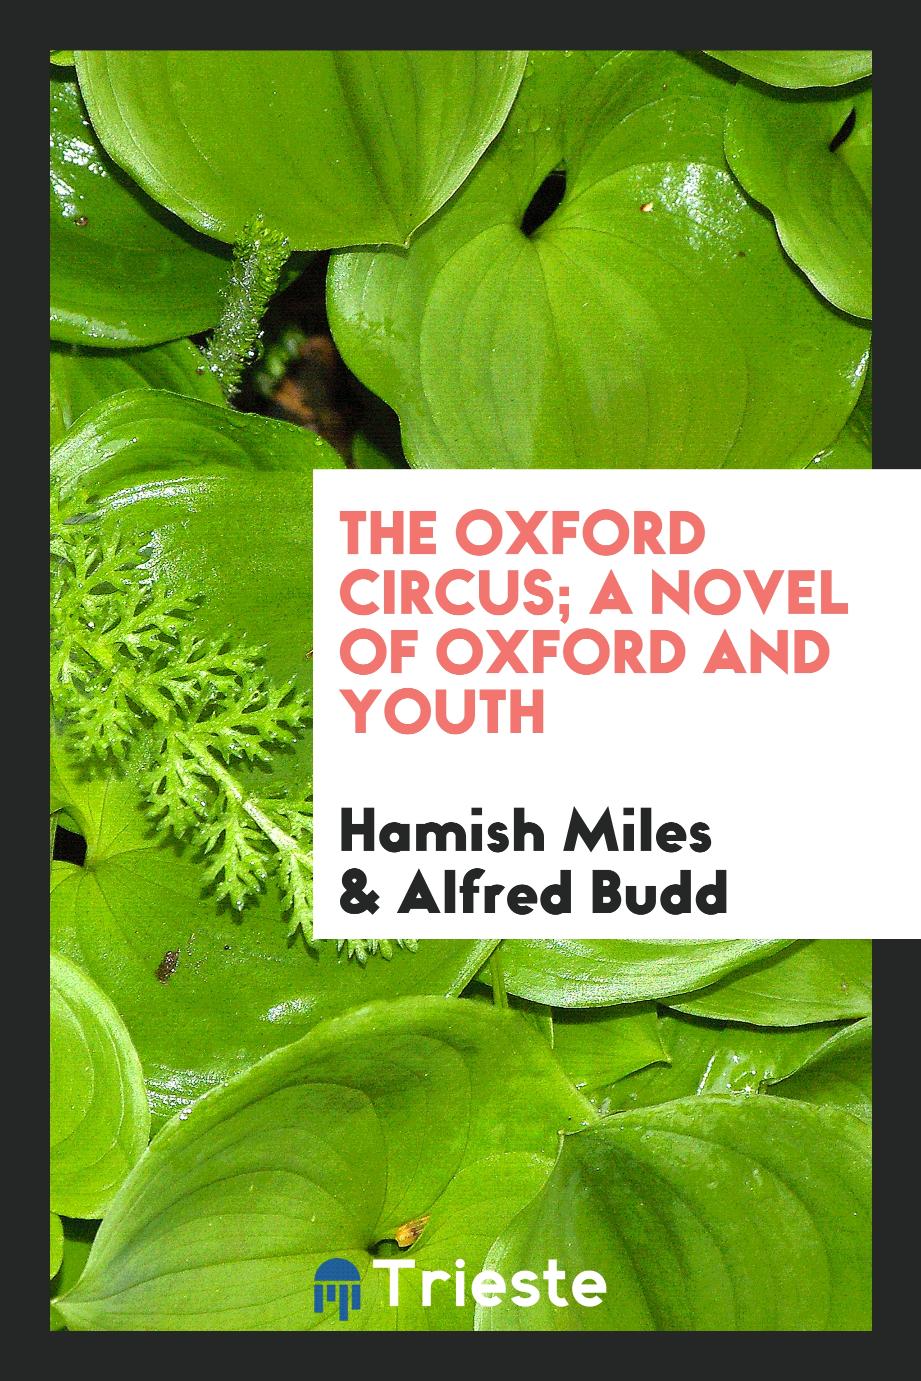 The Oxford circus; a novel of Oxford and youth